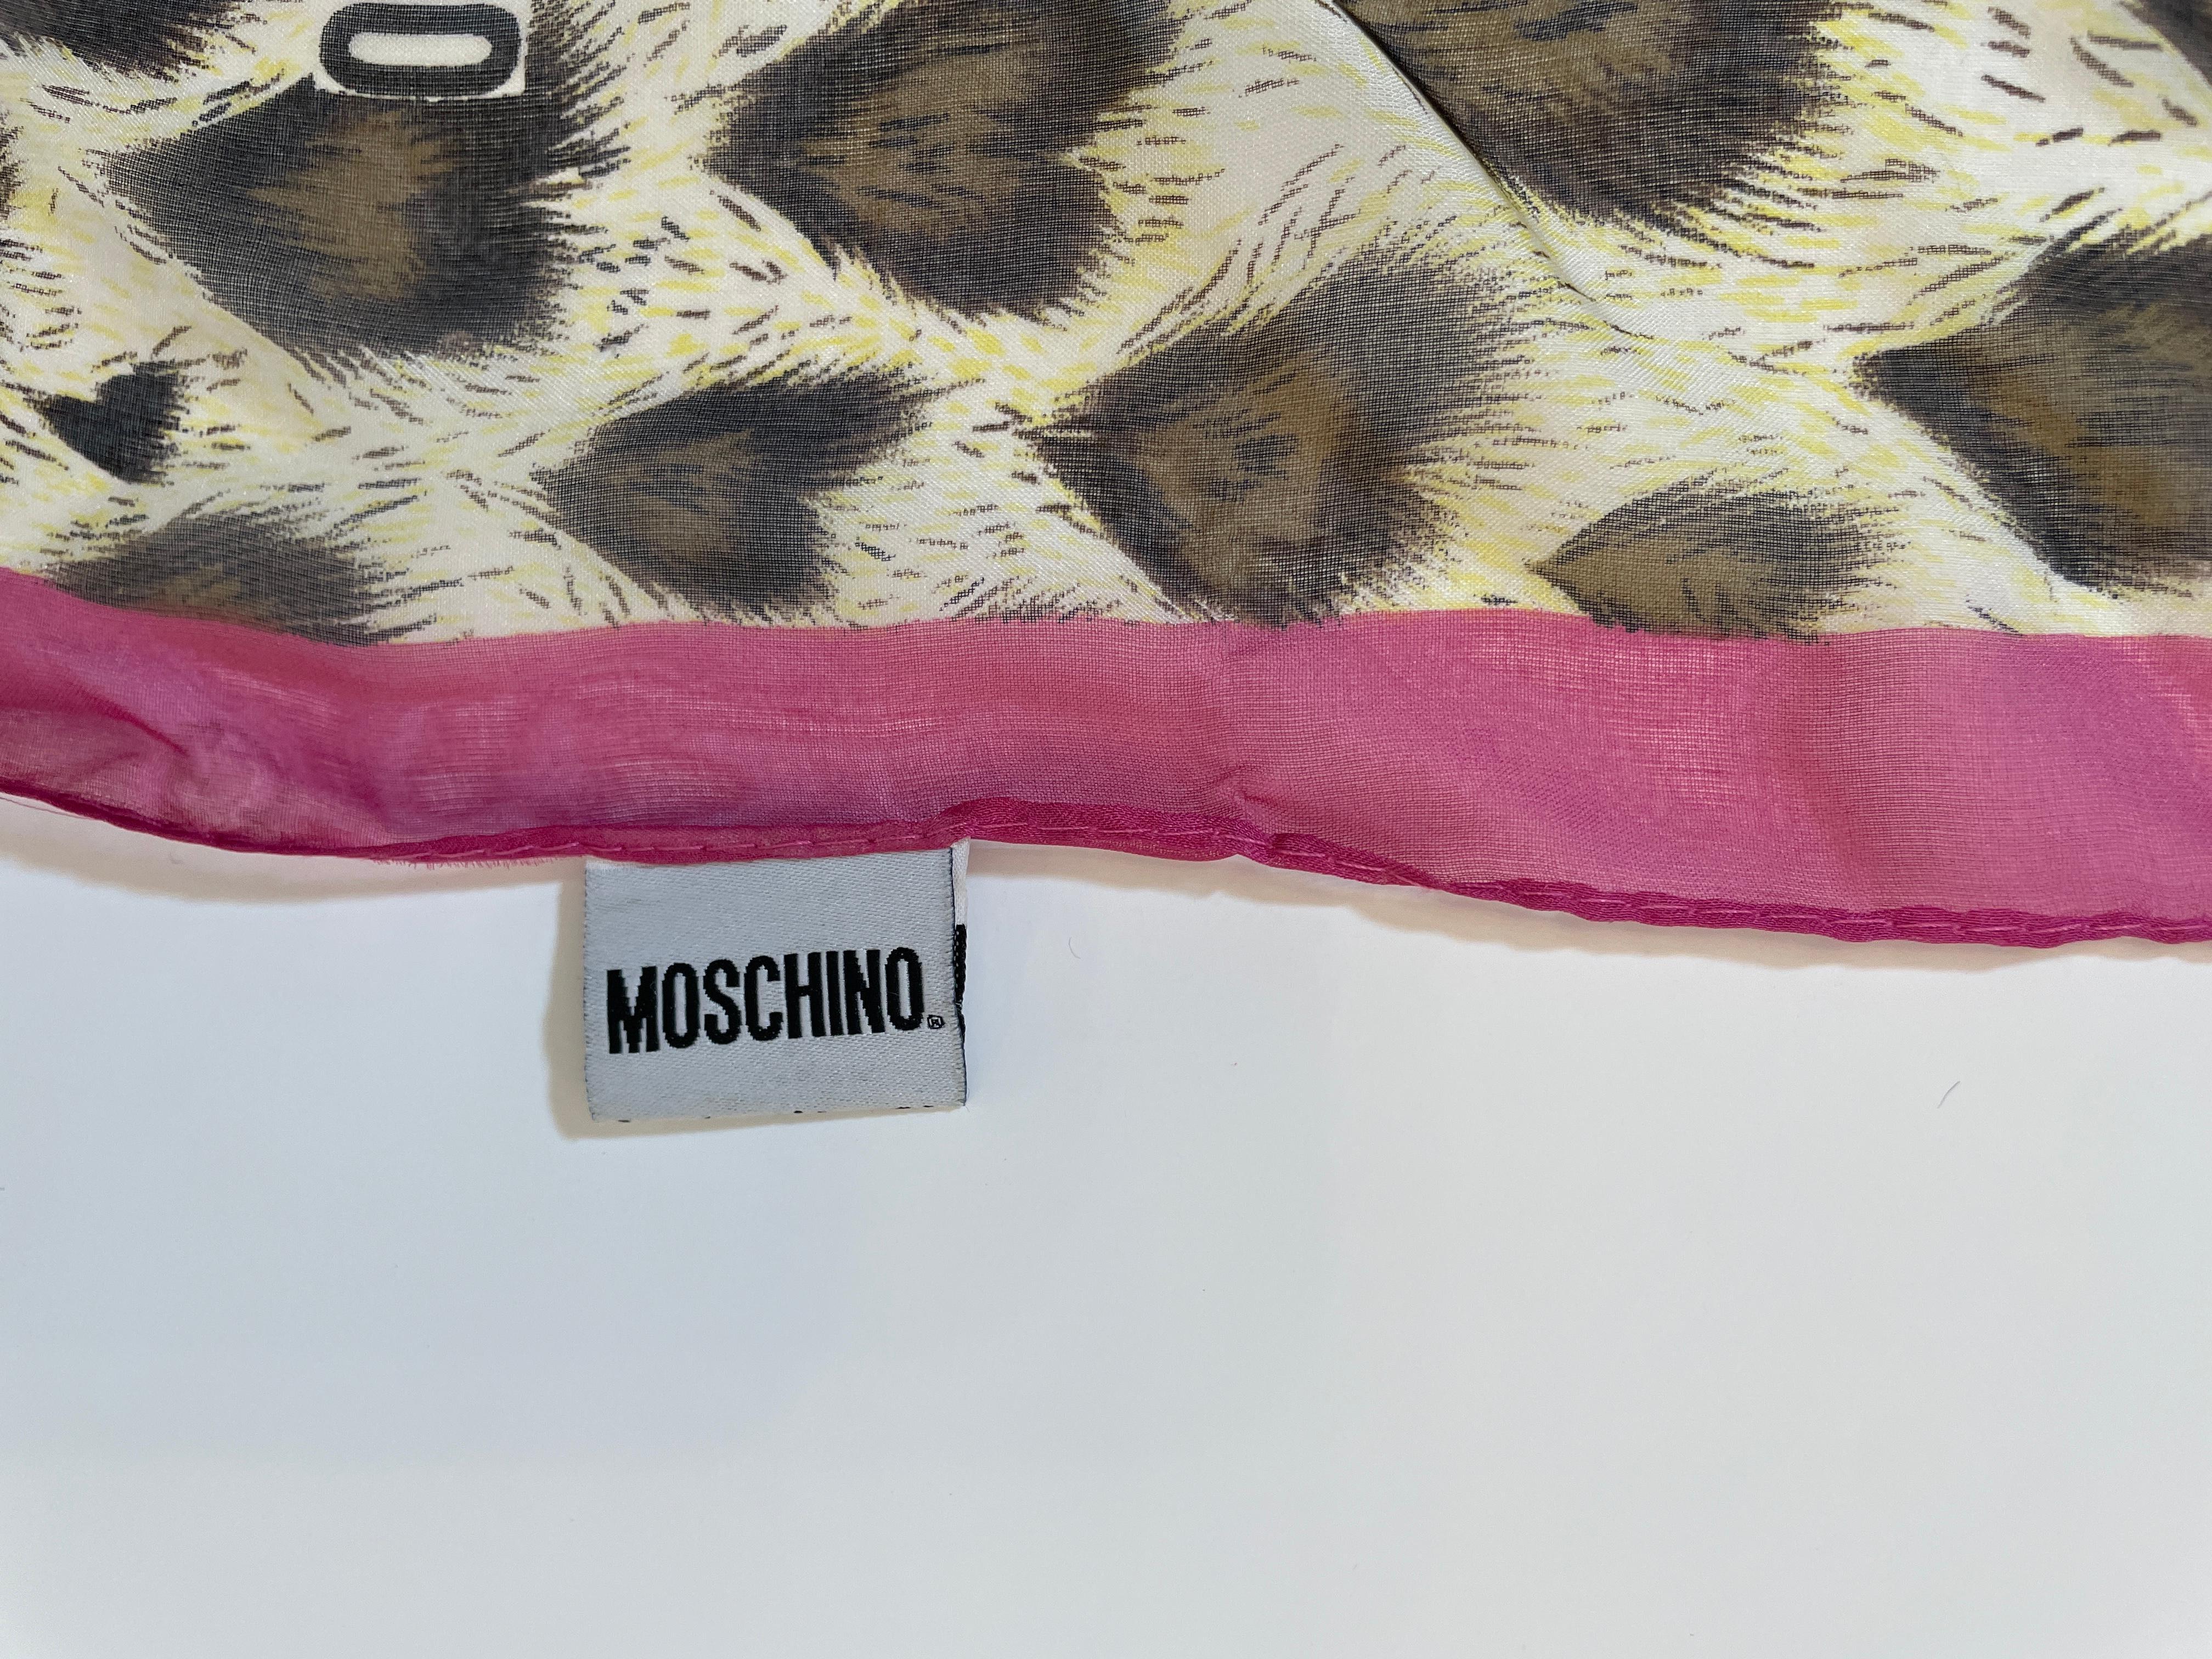 Moschino Animal Print Silk Scarf Made In Italy Pink And Brown 1990s Head Wrap For Sale 2